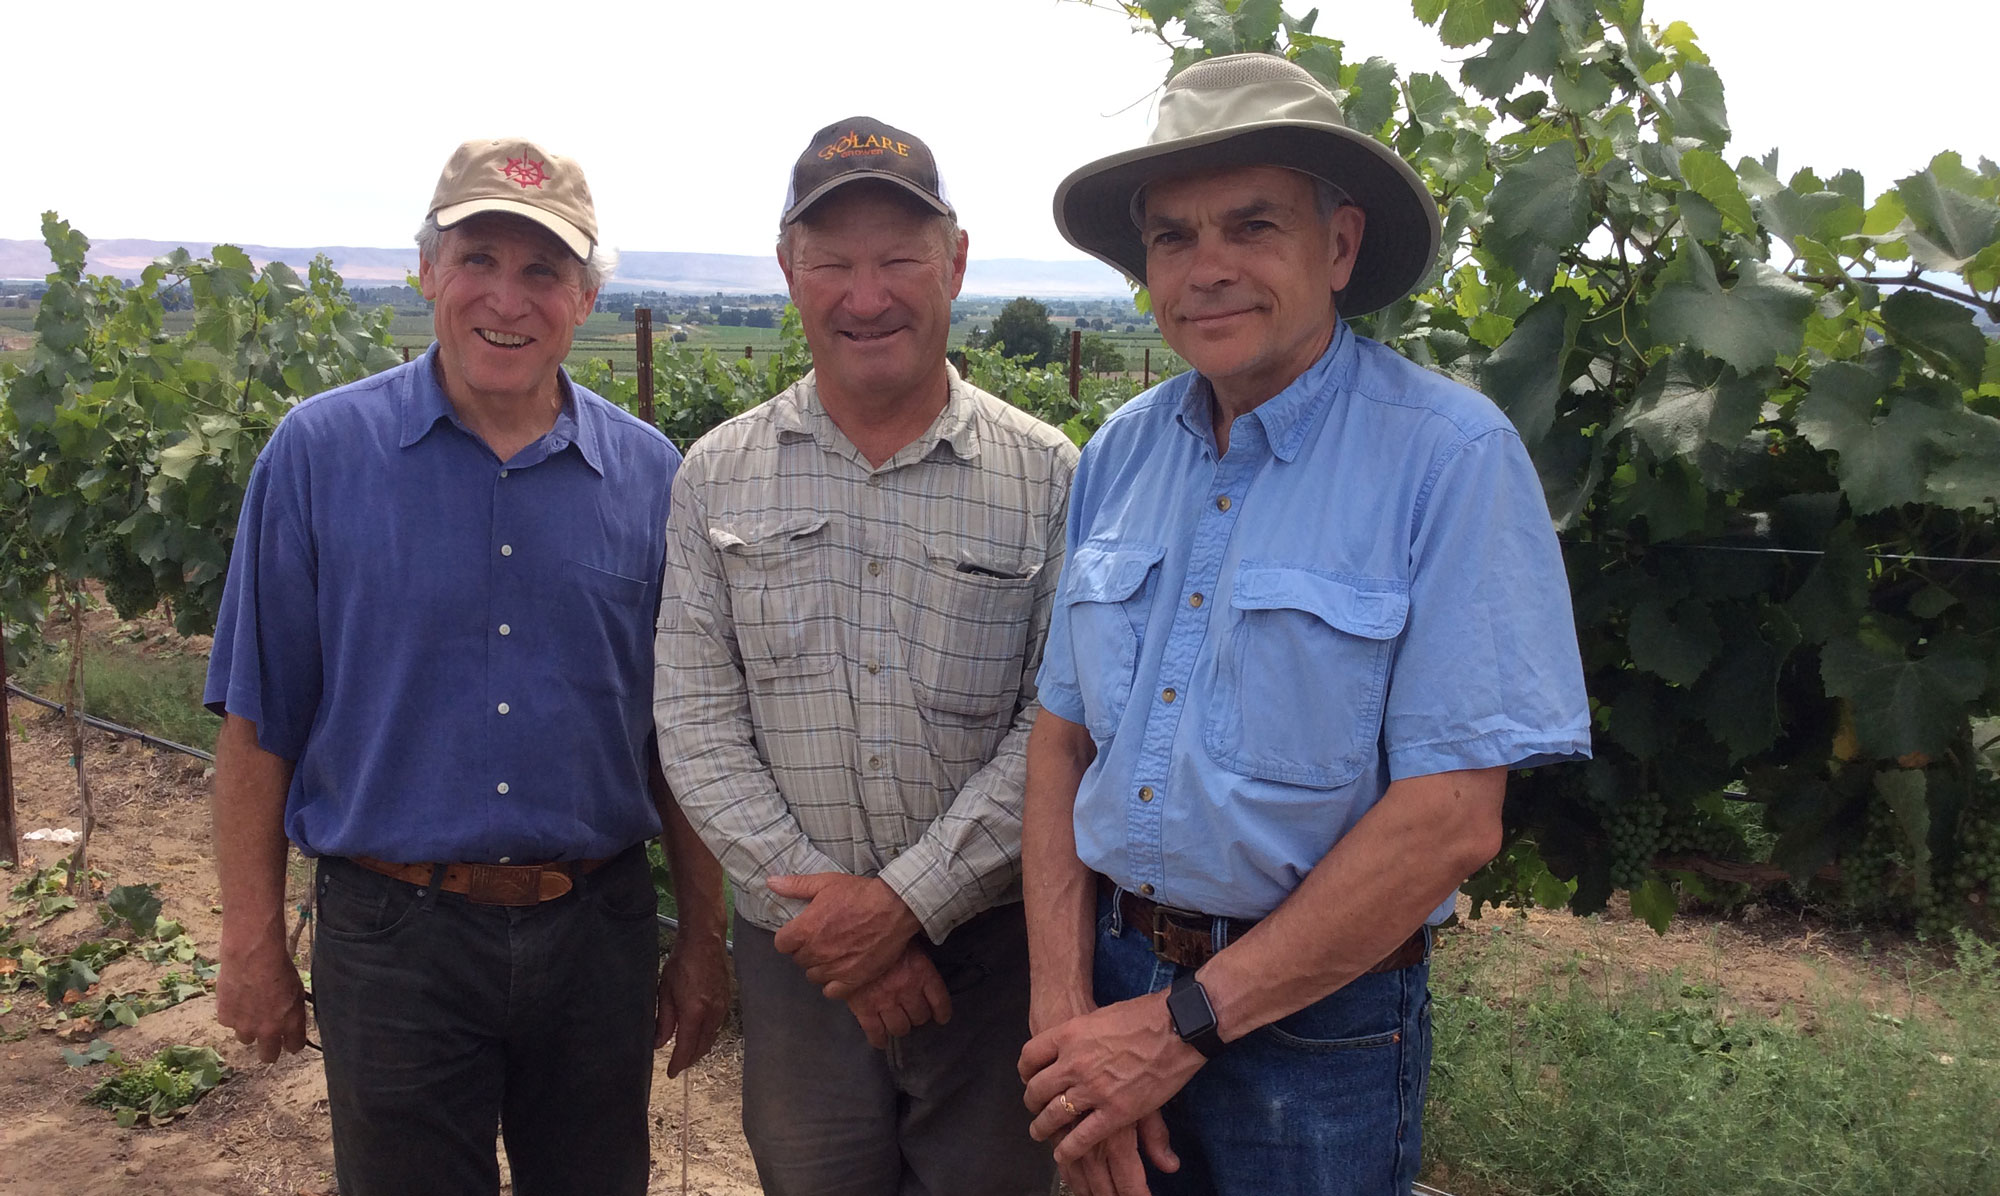 Three men standing together in the vineyard